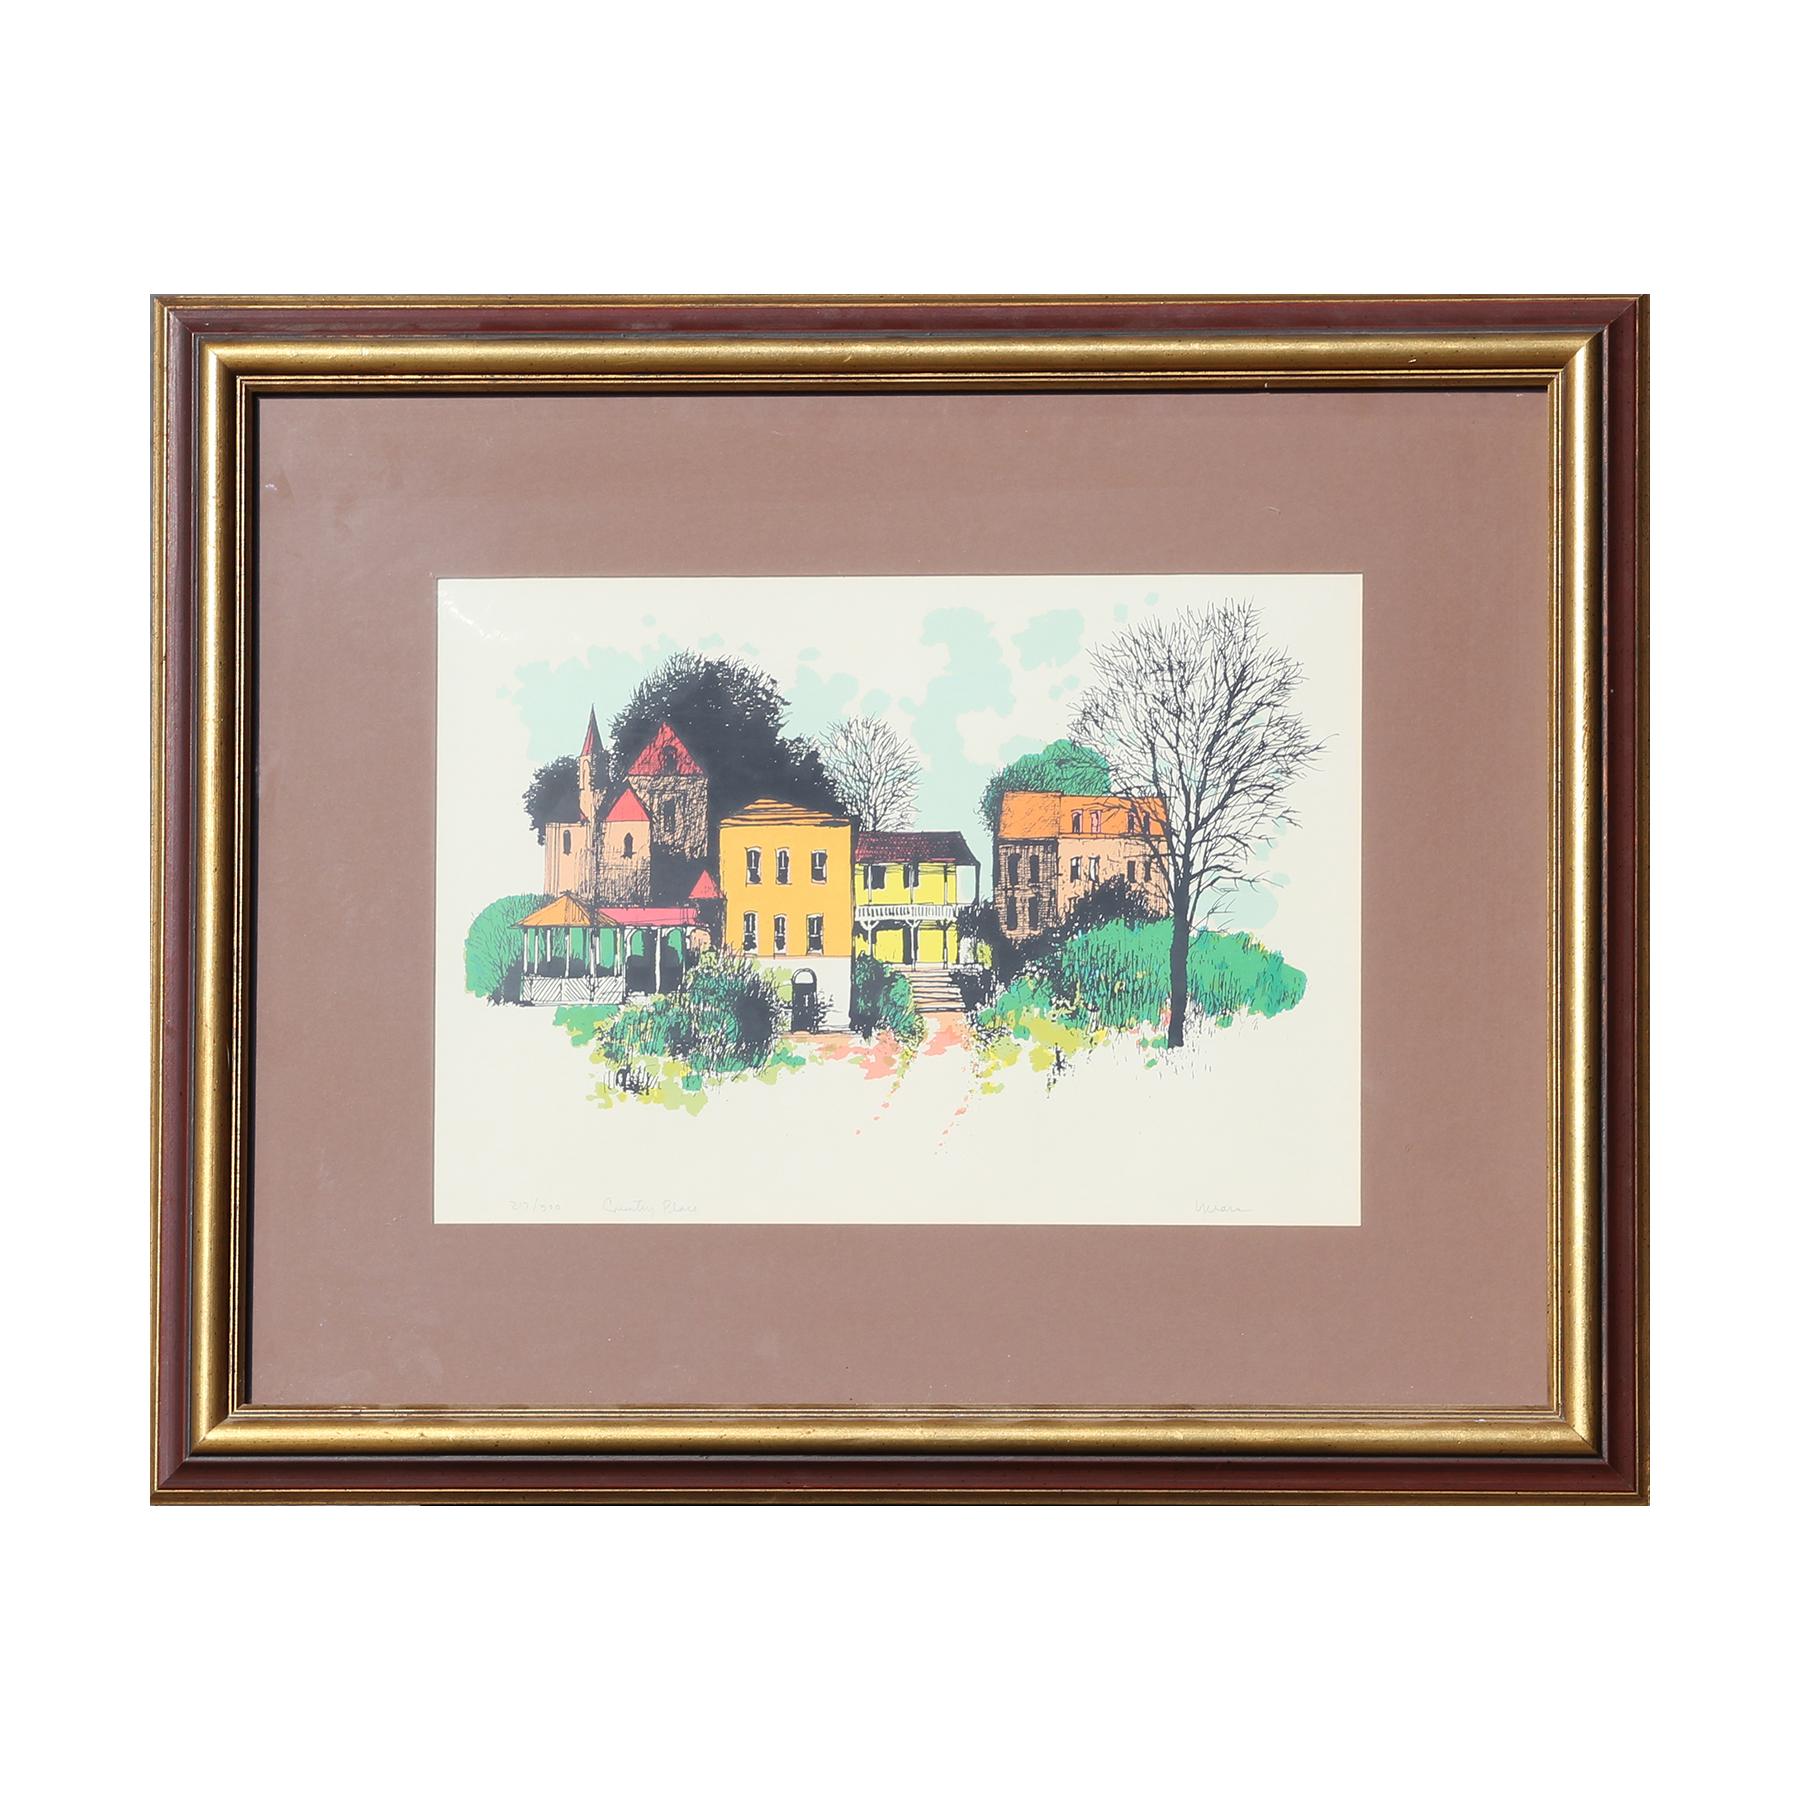 Herbert Mears Abstract Print - "Country Place" Colorful Modern Landscape of Houses Lithograph Edition 217/300